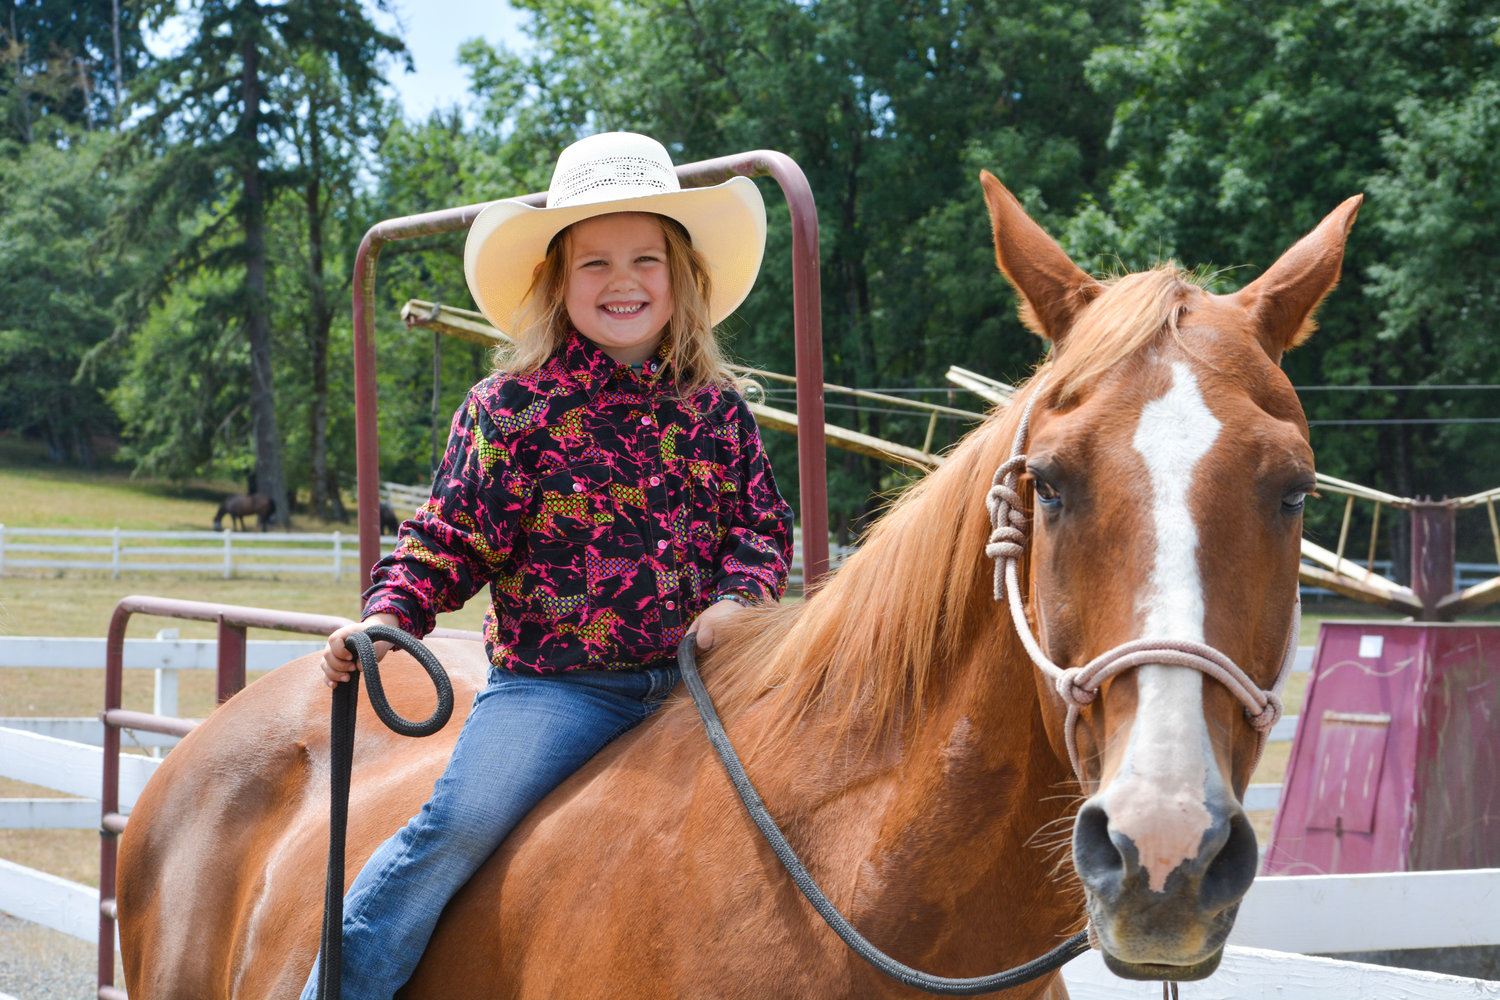 Briar Bleu Hubbs competes in speed poles, barrel racing, dummy goat flanking and dummy roping through the Northwest Youth Rodeo Association.